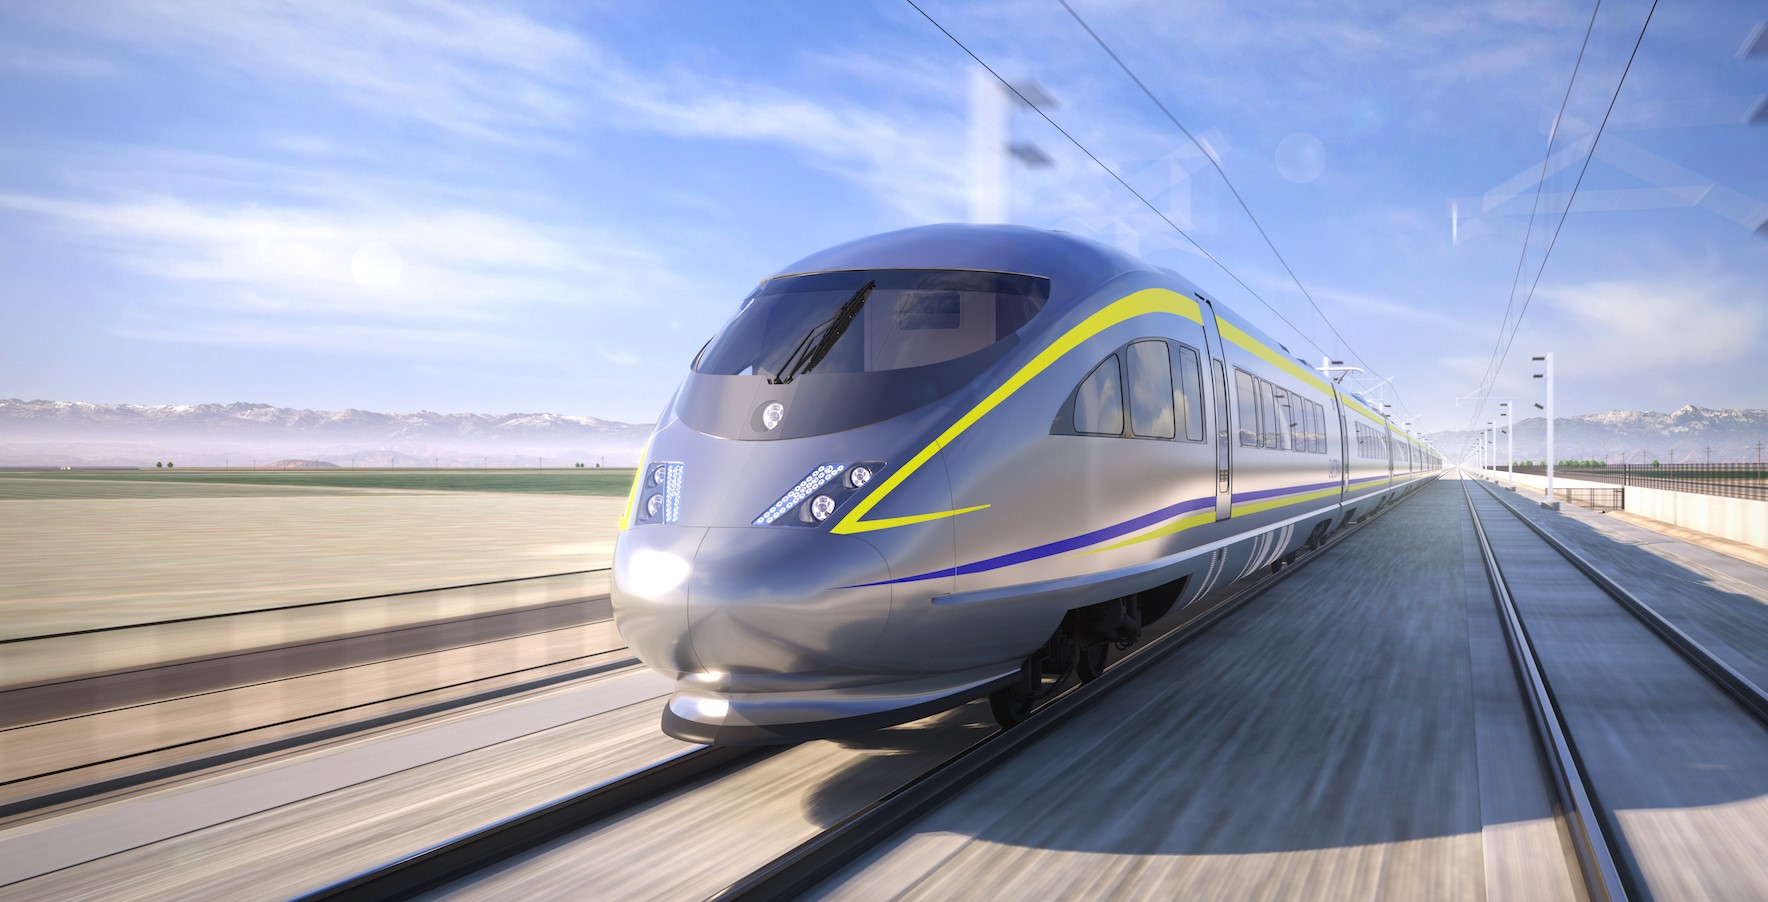 Kick-off meeting is held for the Air + HSR (High-Speed Rail) project